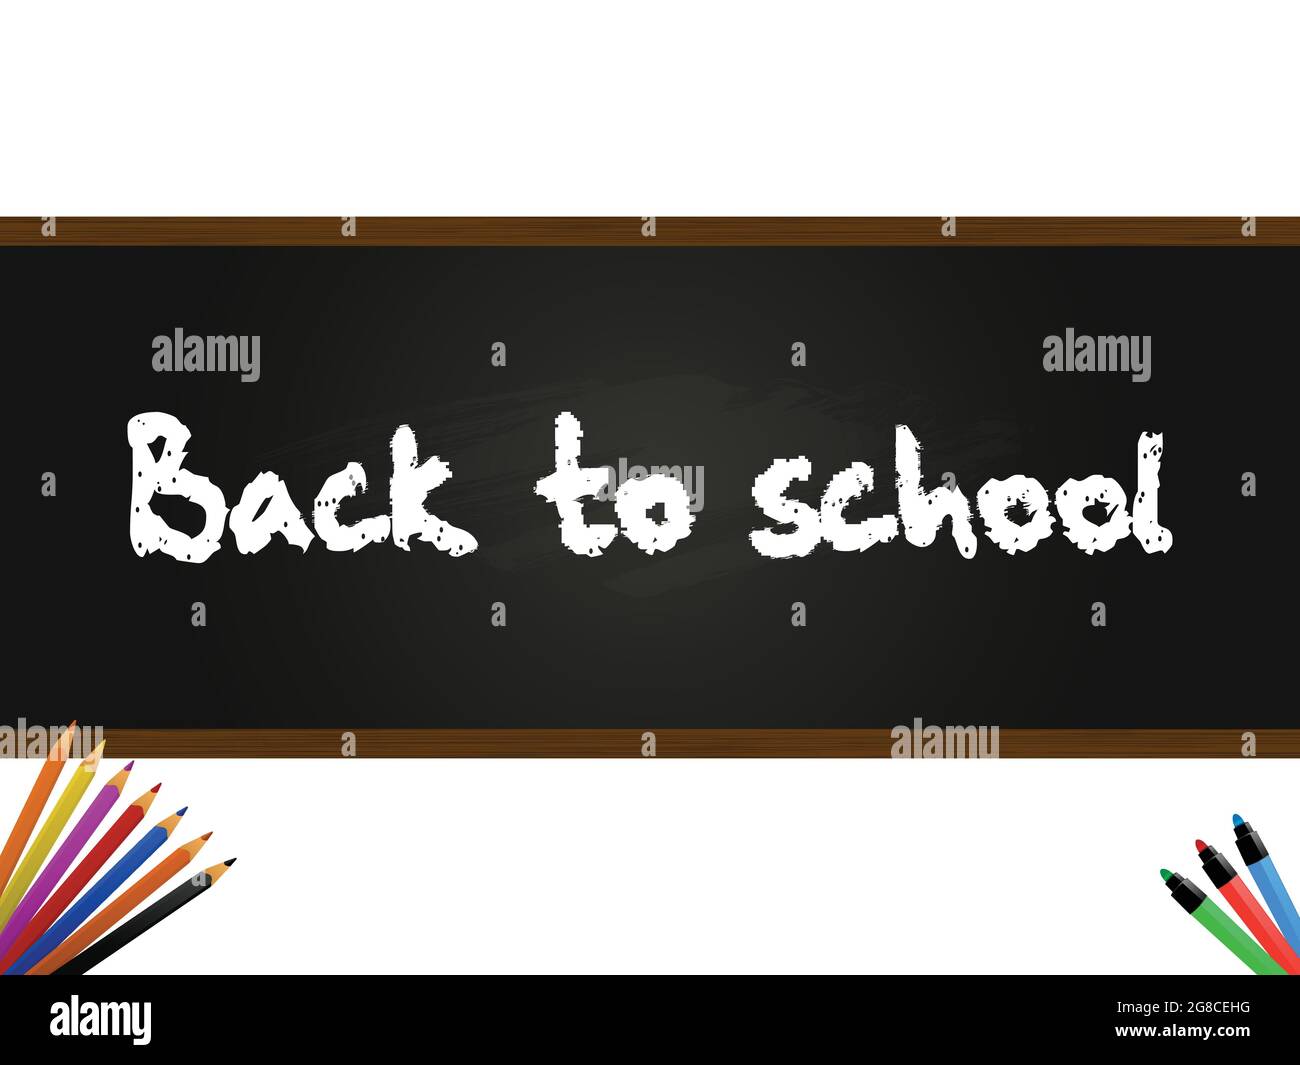 Back To School Decorative Text Over Black Board Panel With Top And Bottom Wooden Frame On White Background With Coloured Pencils And Markers Stock Vector